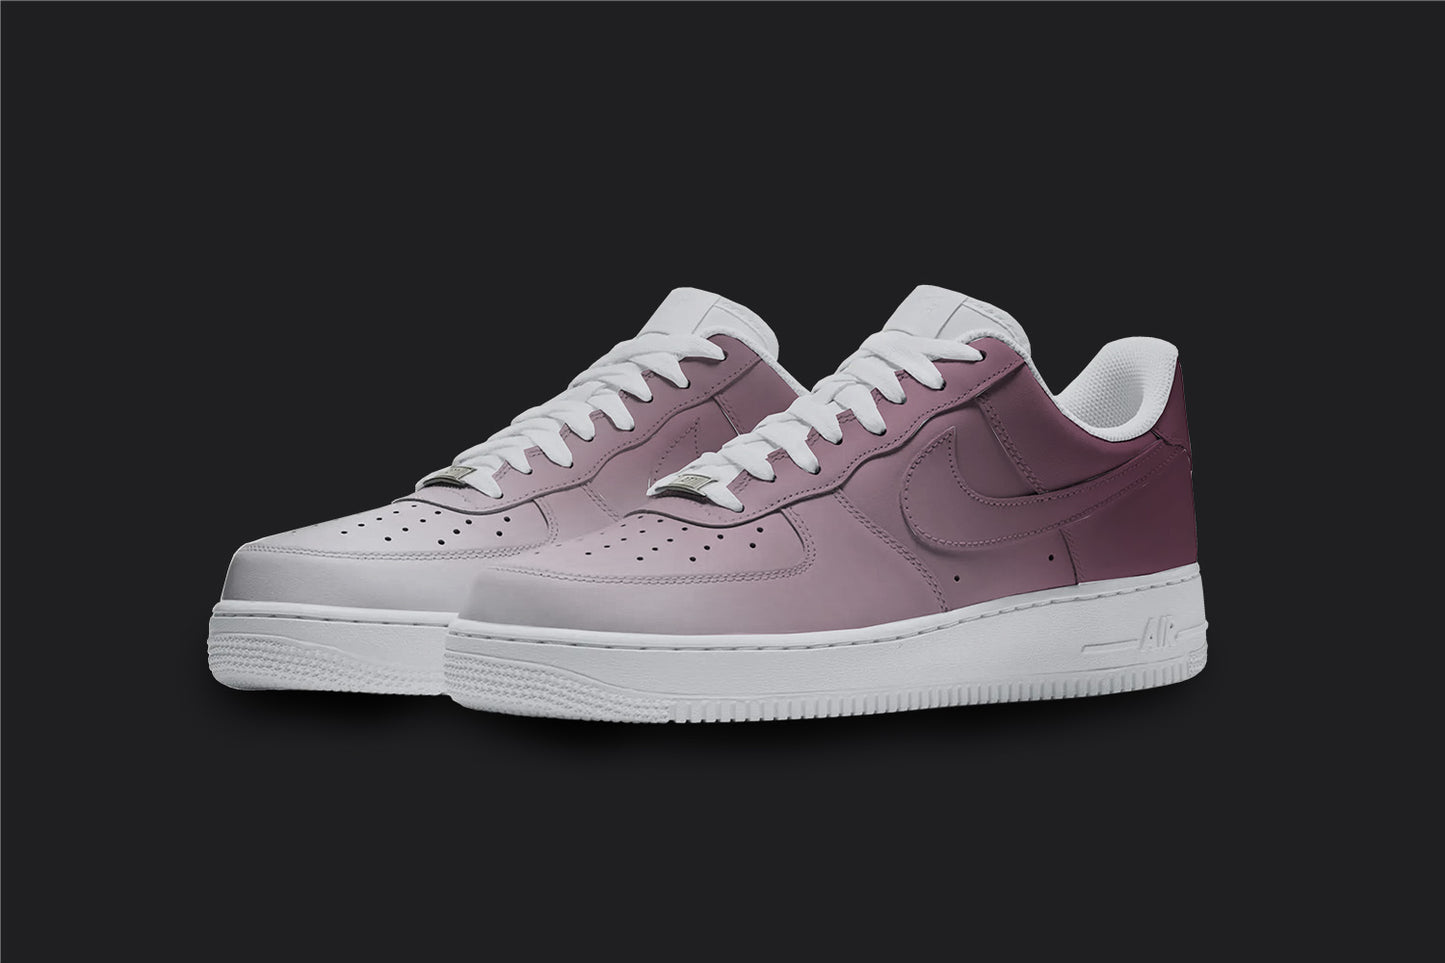 The image is of a Custom Nike Air force 1 sneaker pair on a blank black background. The white custom sneakers have a red fade covering the sneakers.